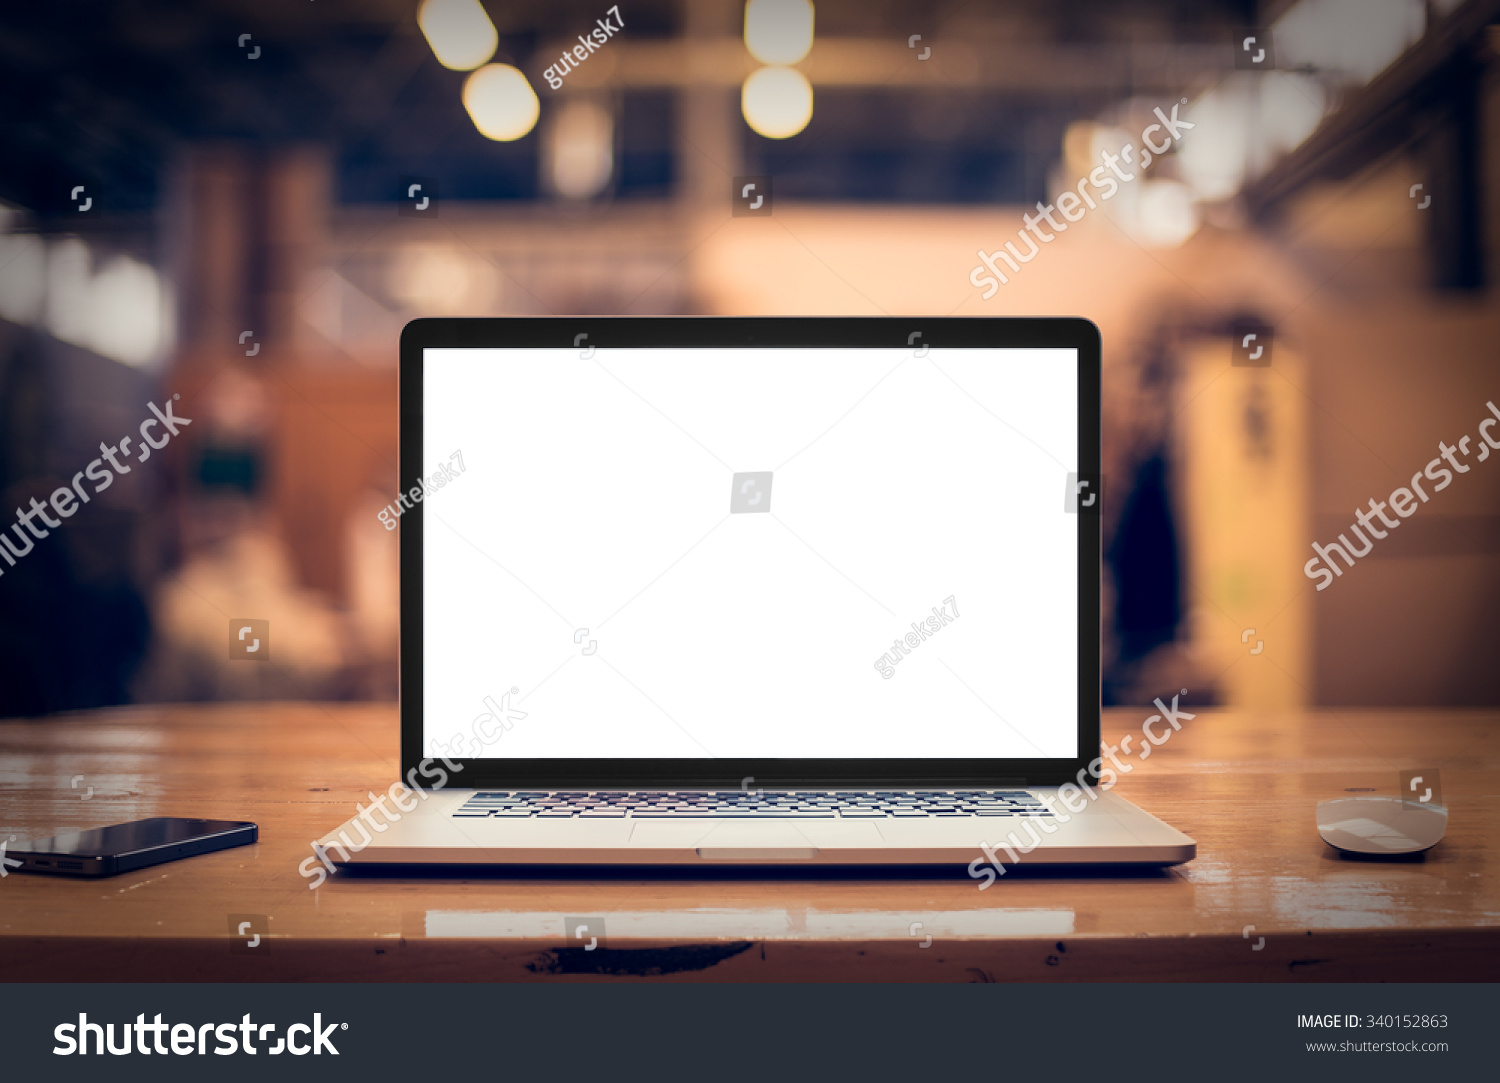 Laptop with blank screen on table. #340152863